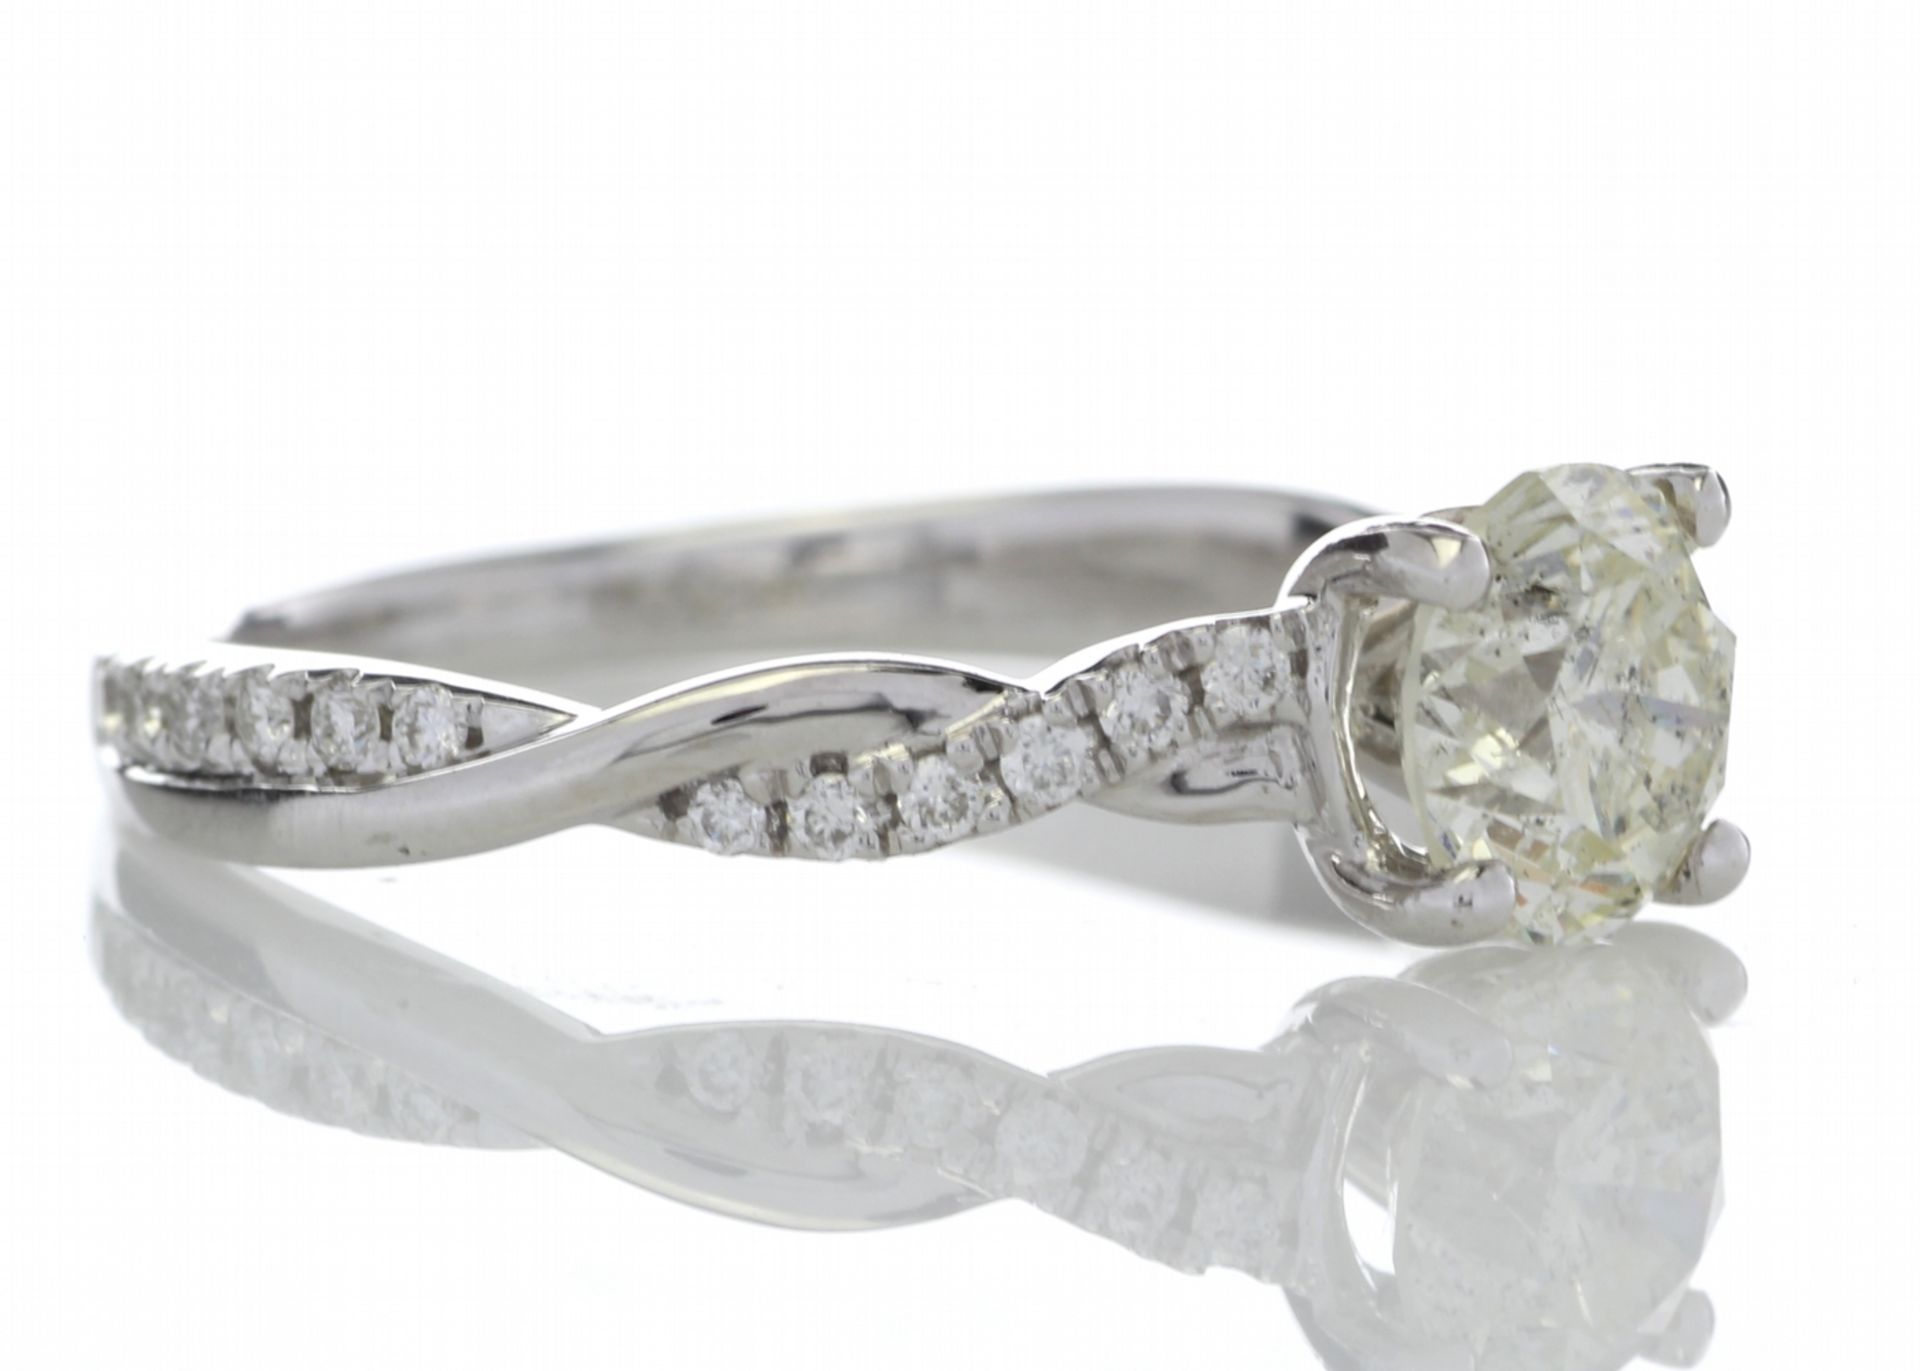 18ct White Gold Diamond Ring With Waved Stone Set Shoulders 1.22 Carats - Valued By GIE £27,950.00 - - Image 4 of 6